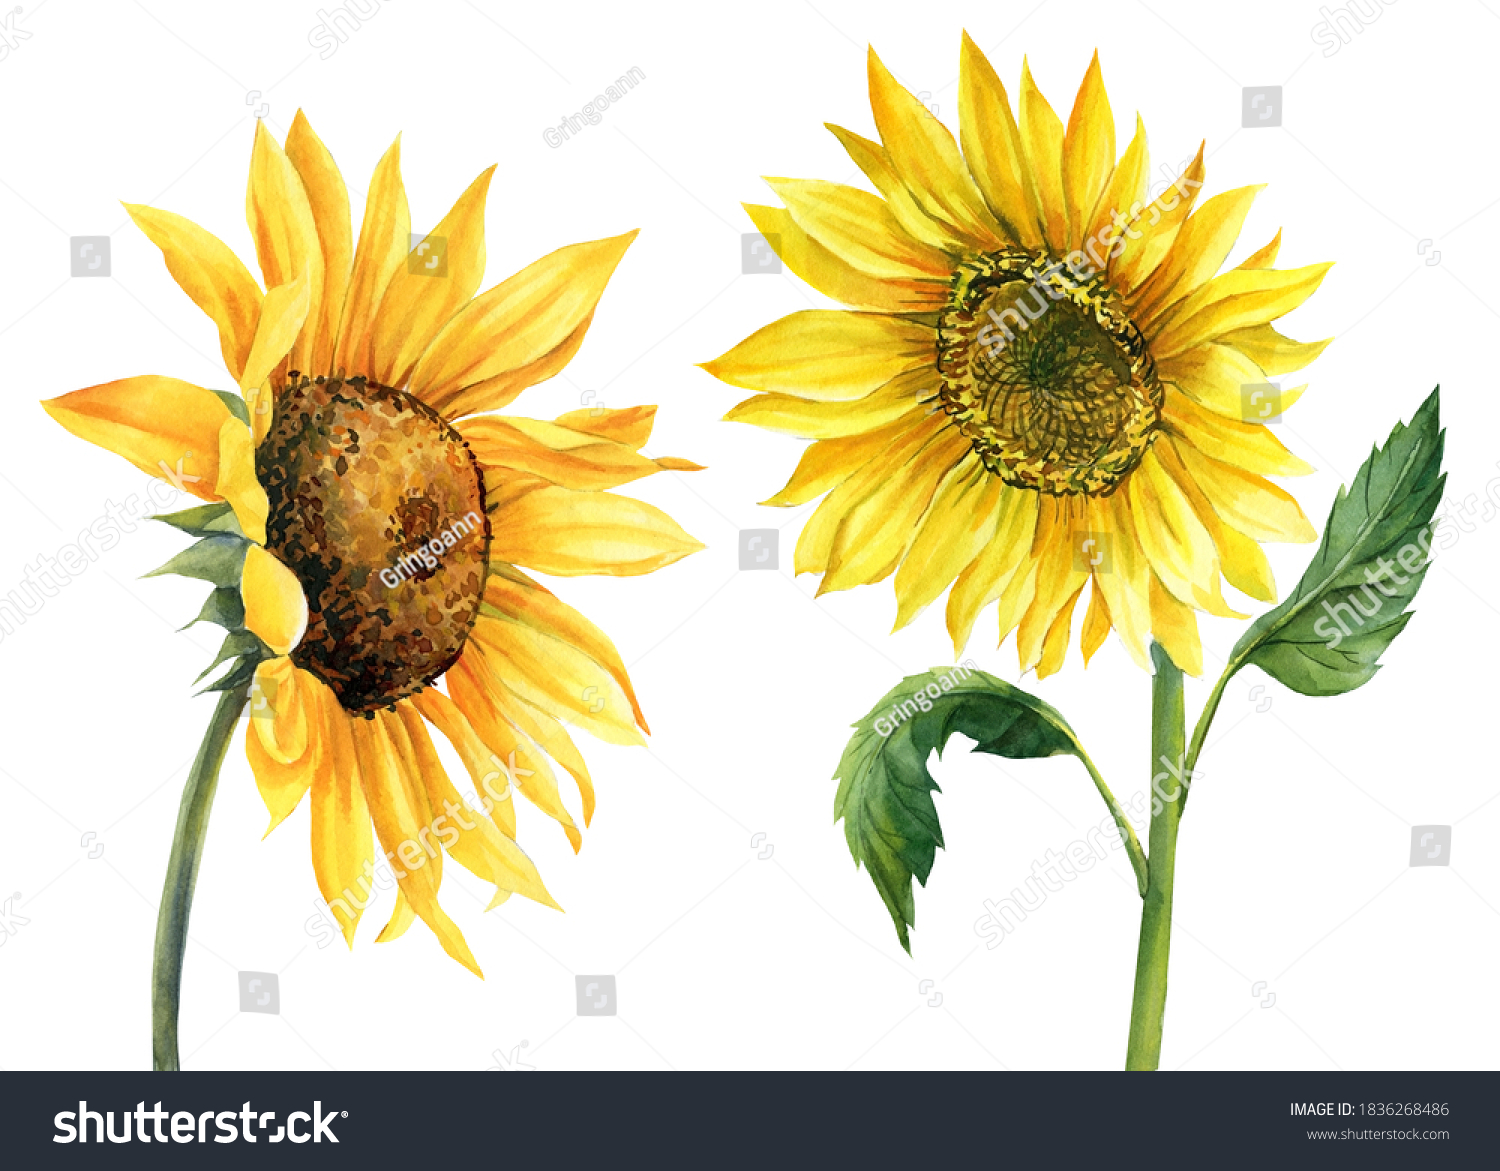 Sunflower On Isolated White Background Watercolor Stock Illustration ...